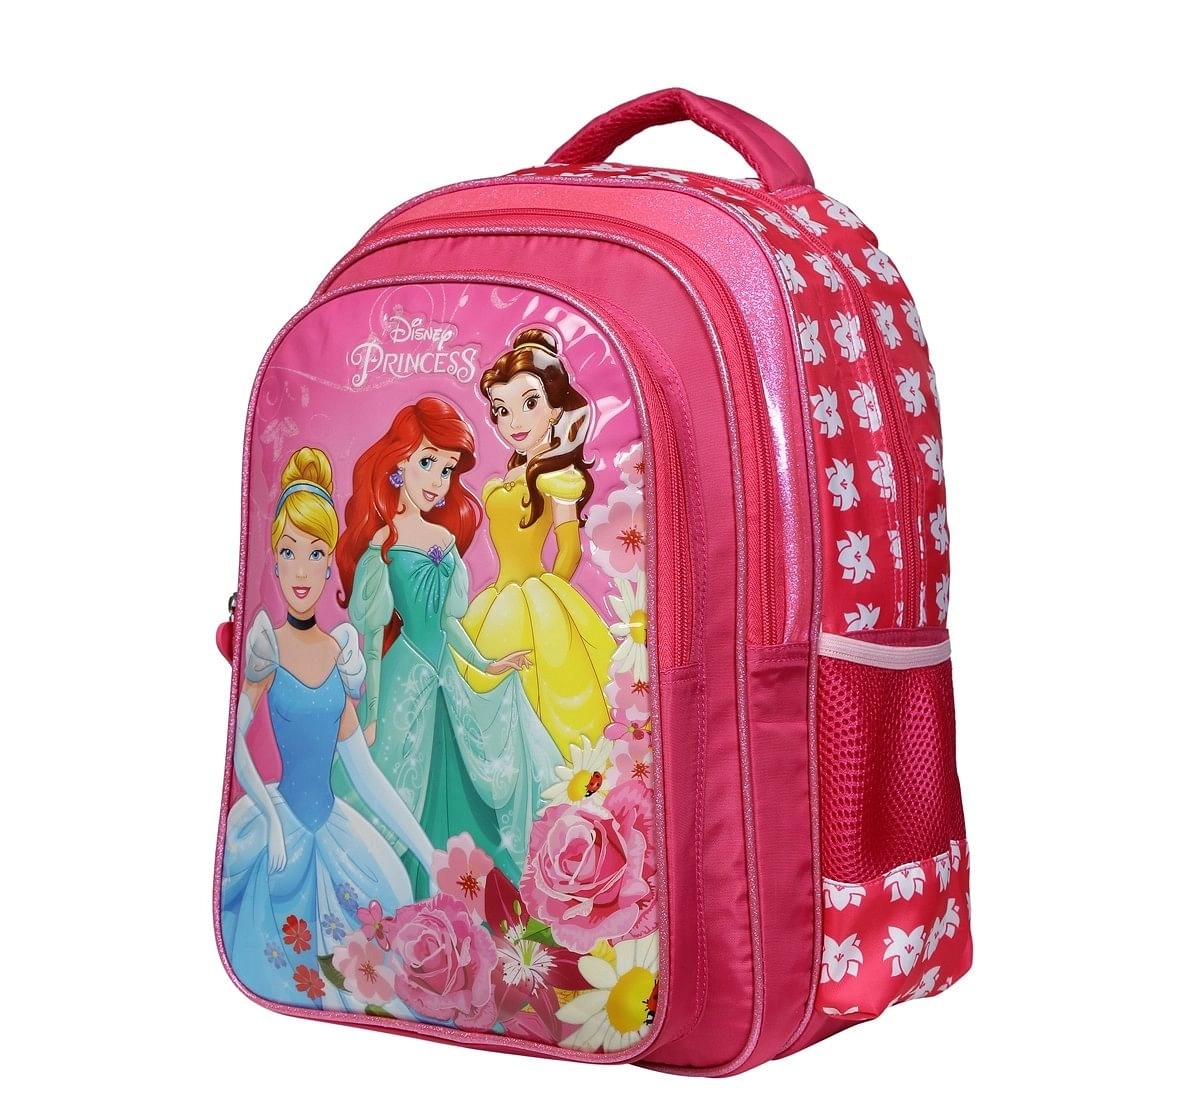 Simba Princess Dream Impossible 16 Backpack Multicolor 3Y+